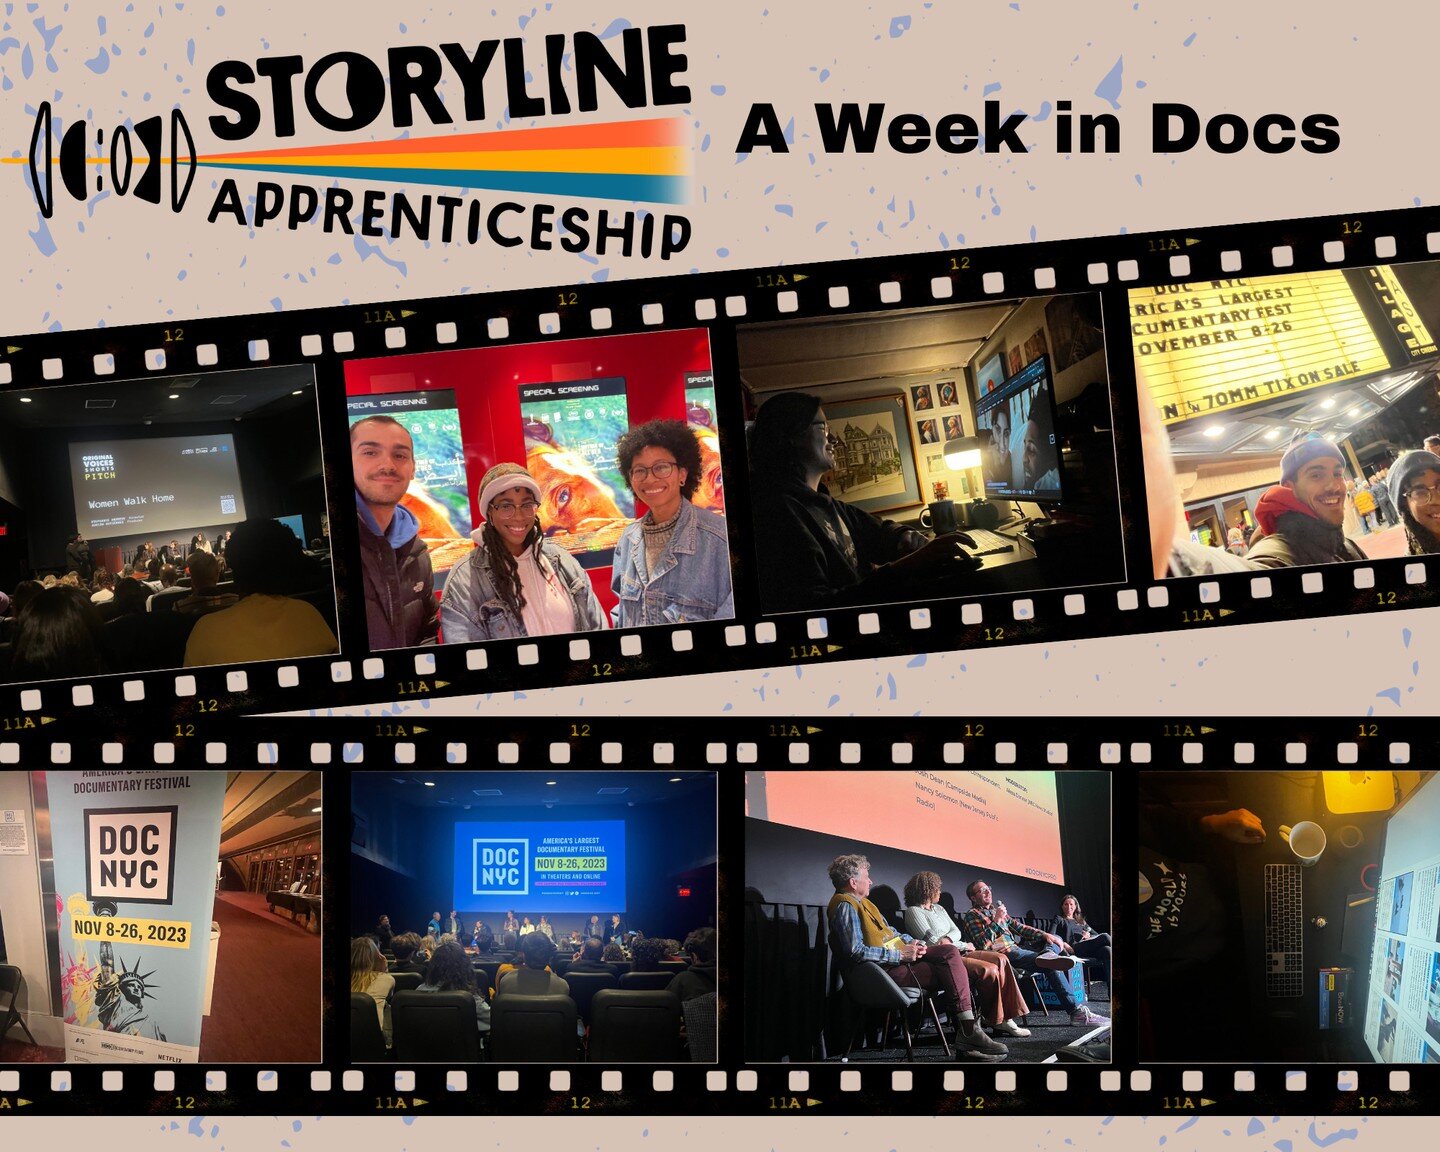 It was a typical Week in Docs for the Storyline team! Storyline apprentices Kunga and Courtney, and associate producer Marshall recently spent a week attending DOC NYC in person and online, and For Your Consideration Screenings for The Mother of All 